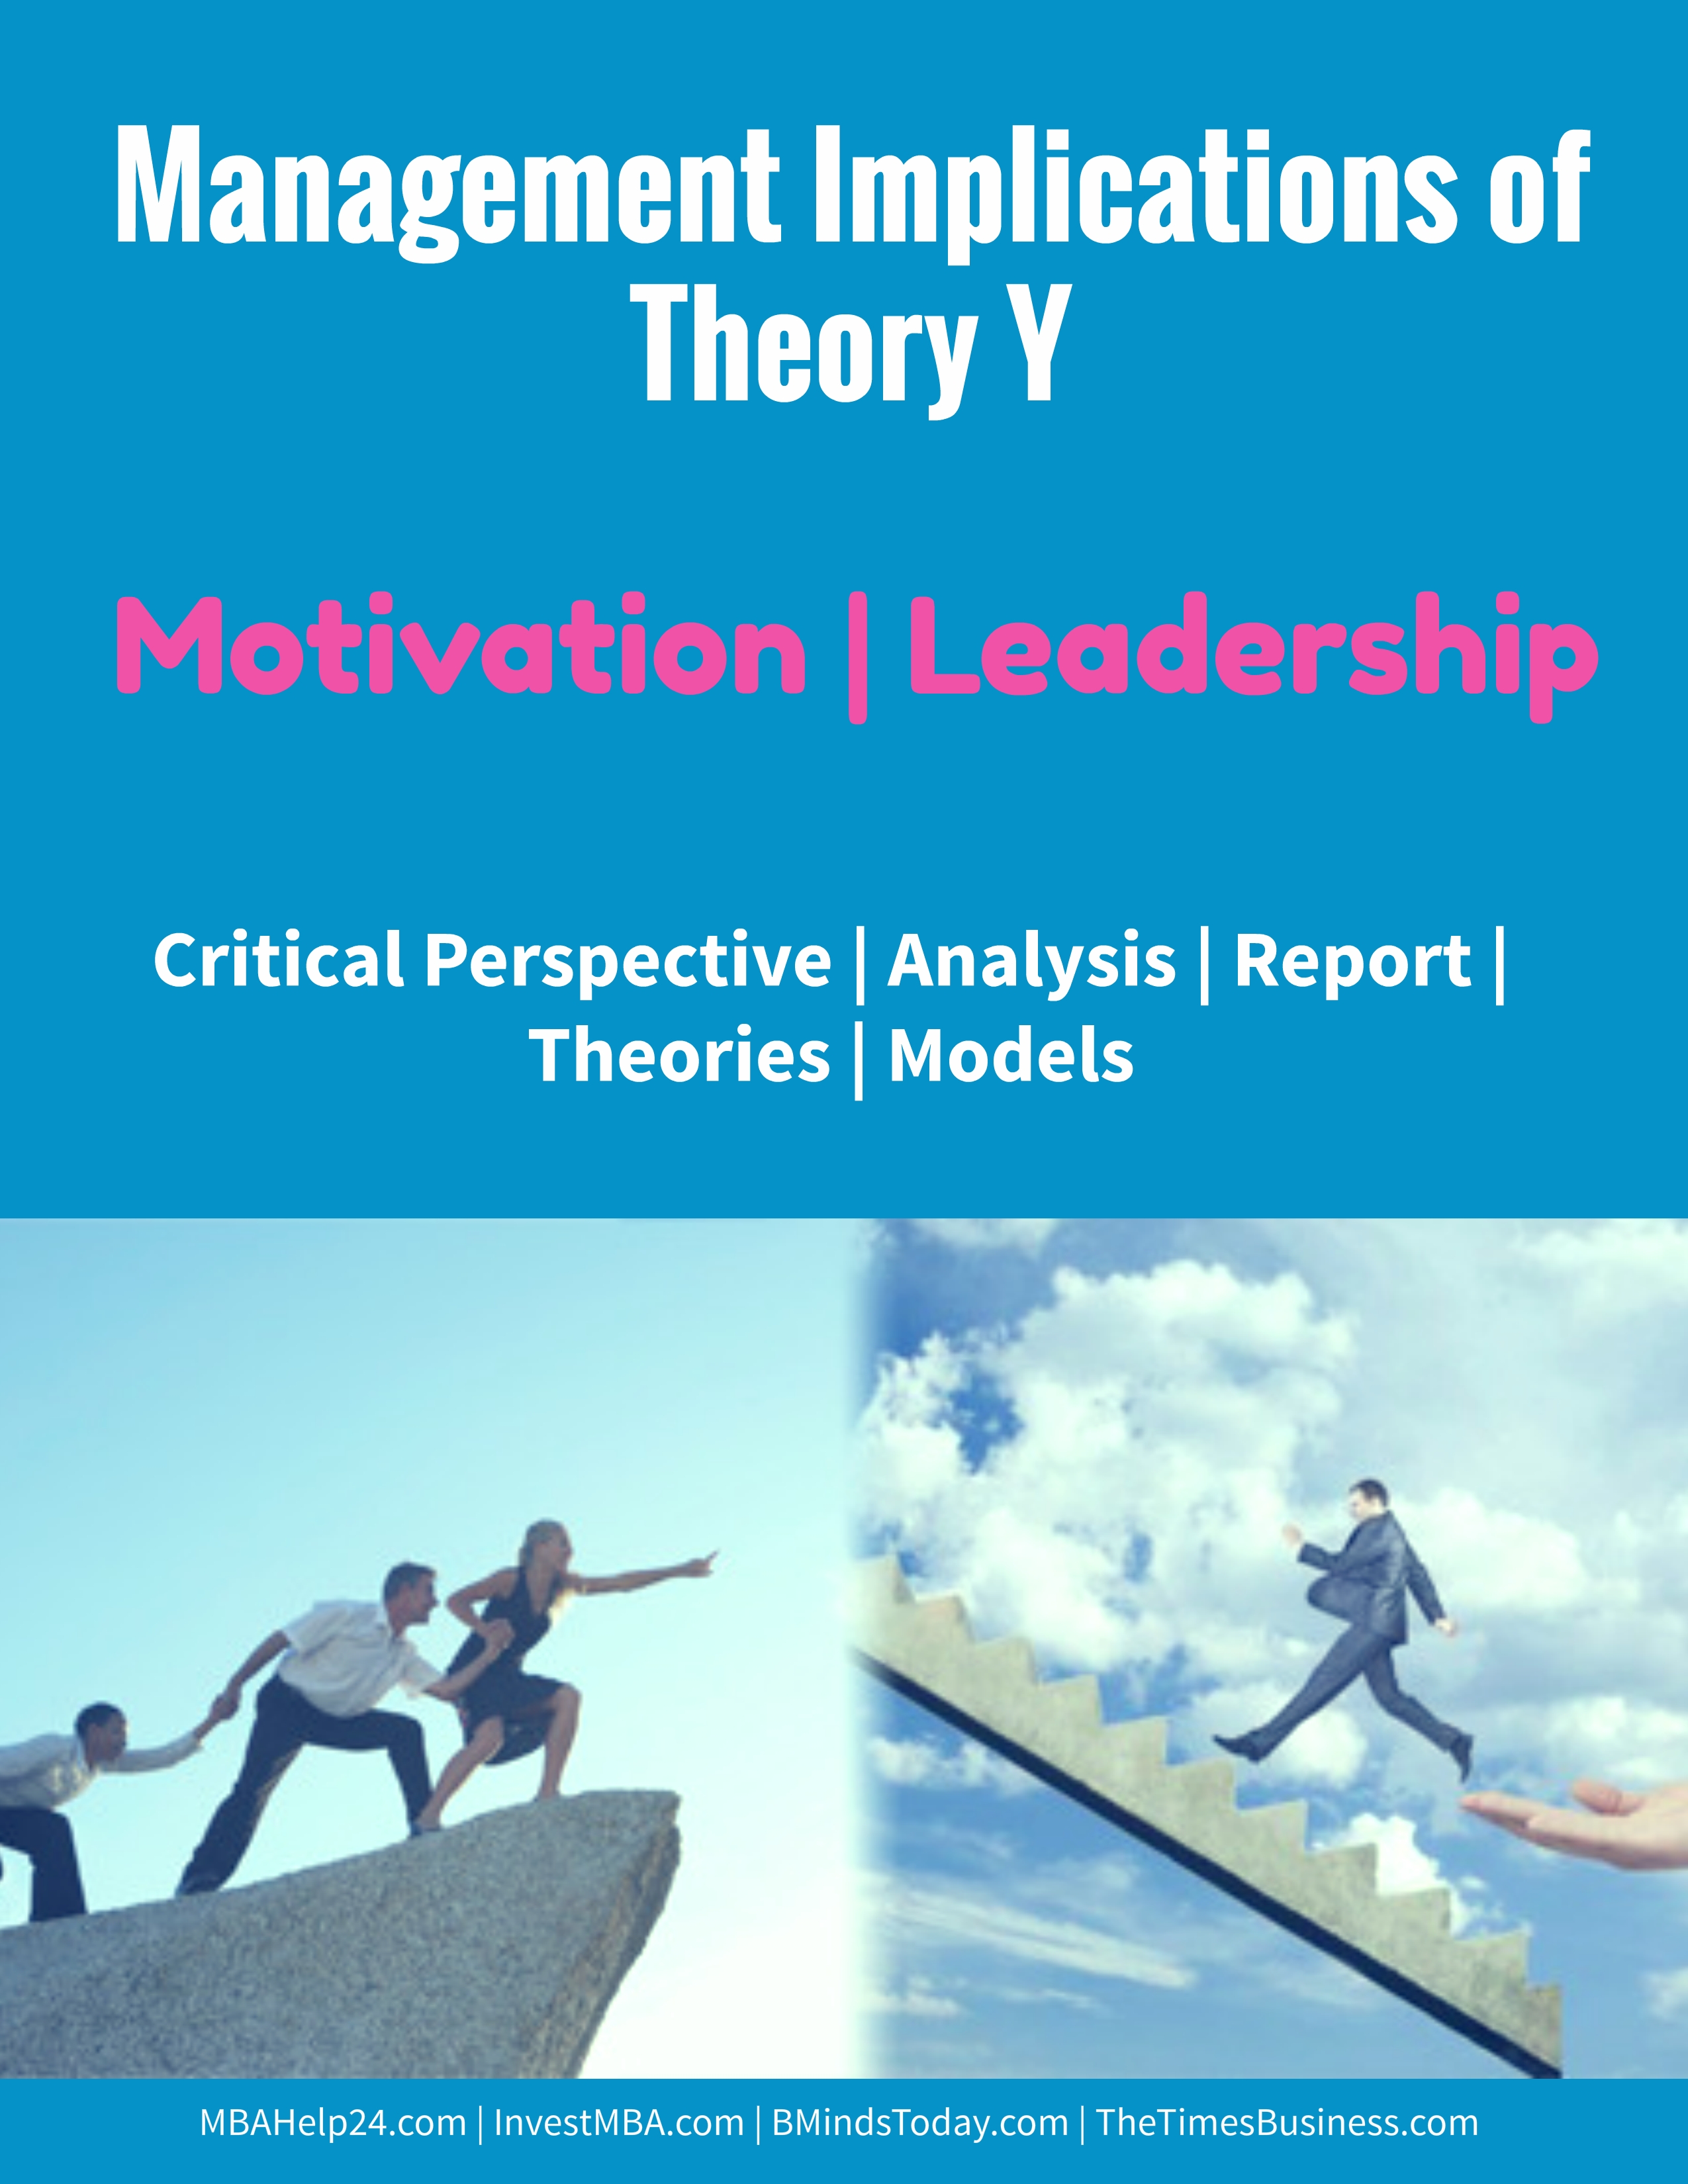 Management Implications of Theory Y | Motivation | Leadership theory y Management Implications of Theory Y | Motivation | Leadership management implications of theory y